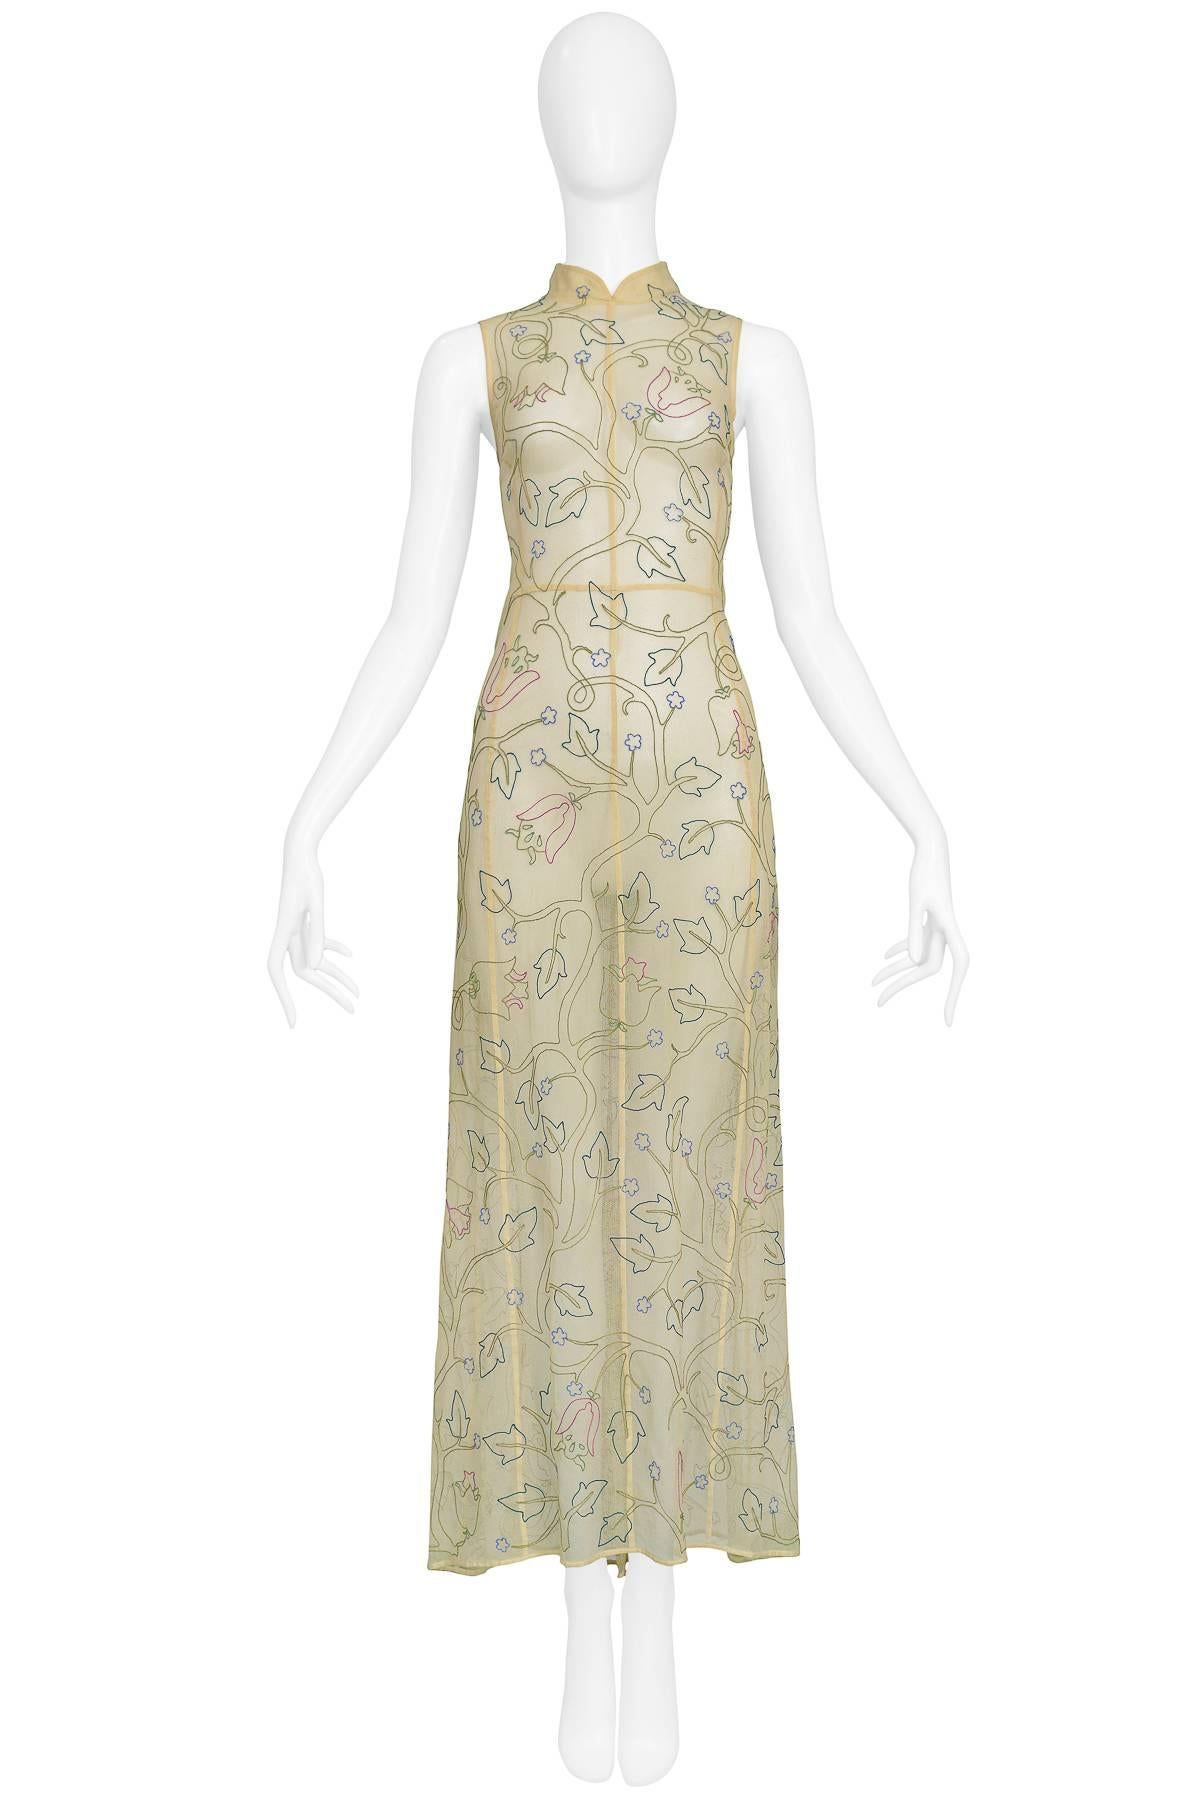 Vintage Prada butter yellow mesh tea length dress with floral embroidery throughout & nehru collar. Back snap closure.

Excellent Condition.

Size: Small

